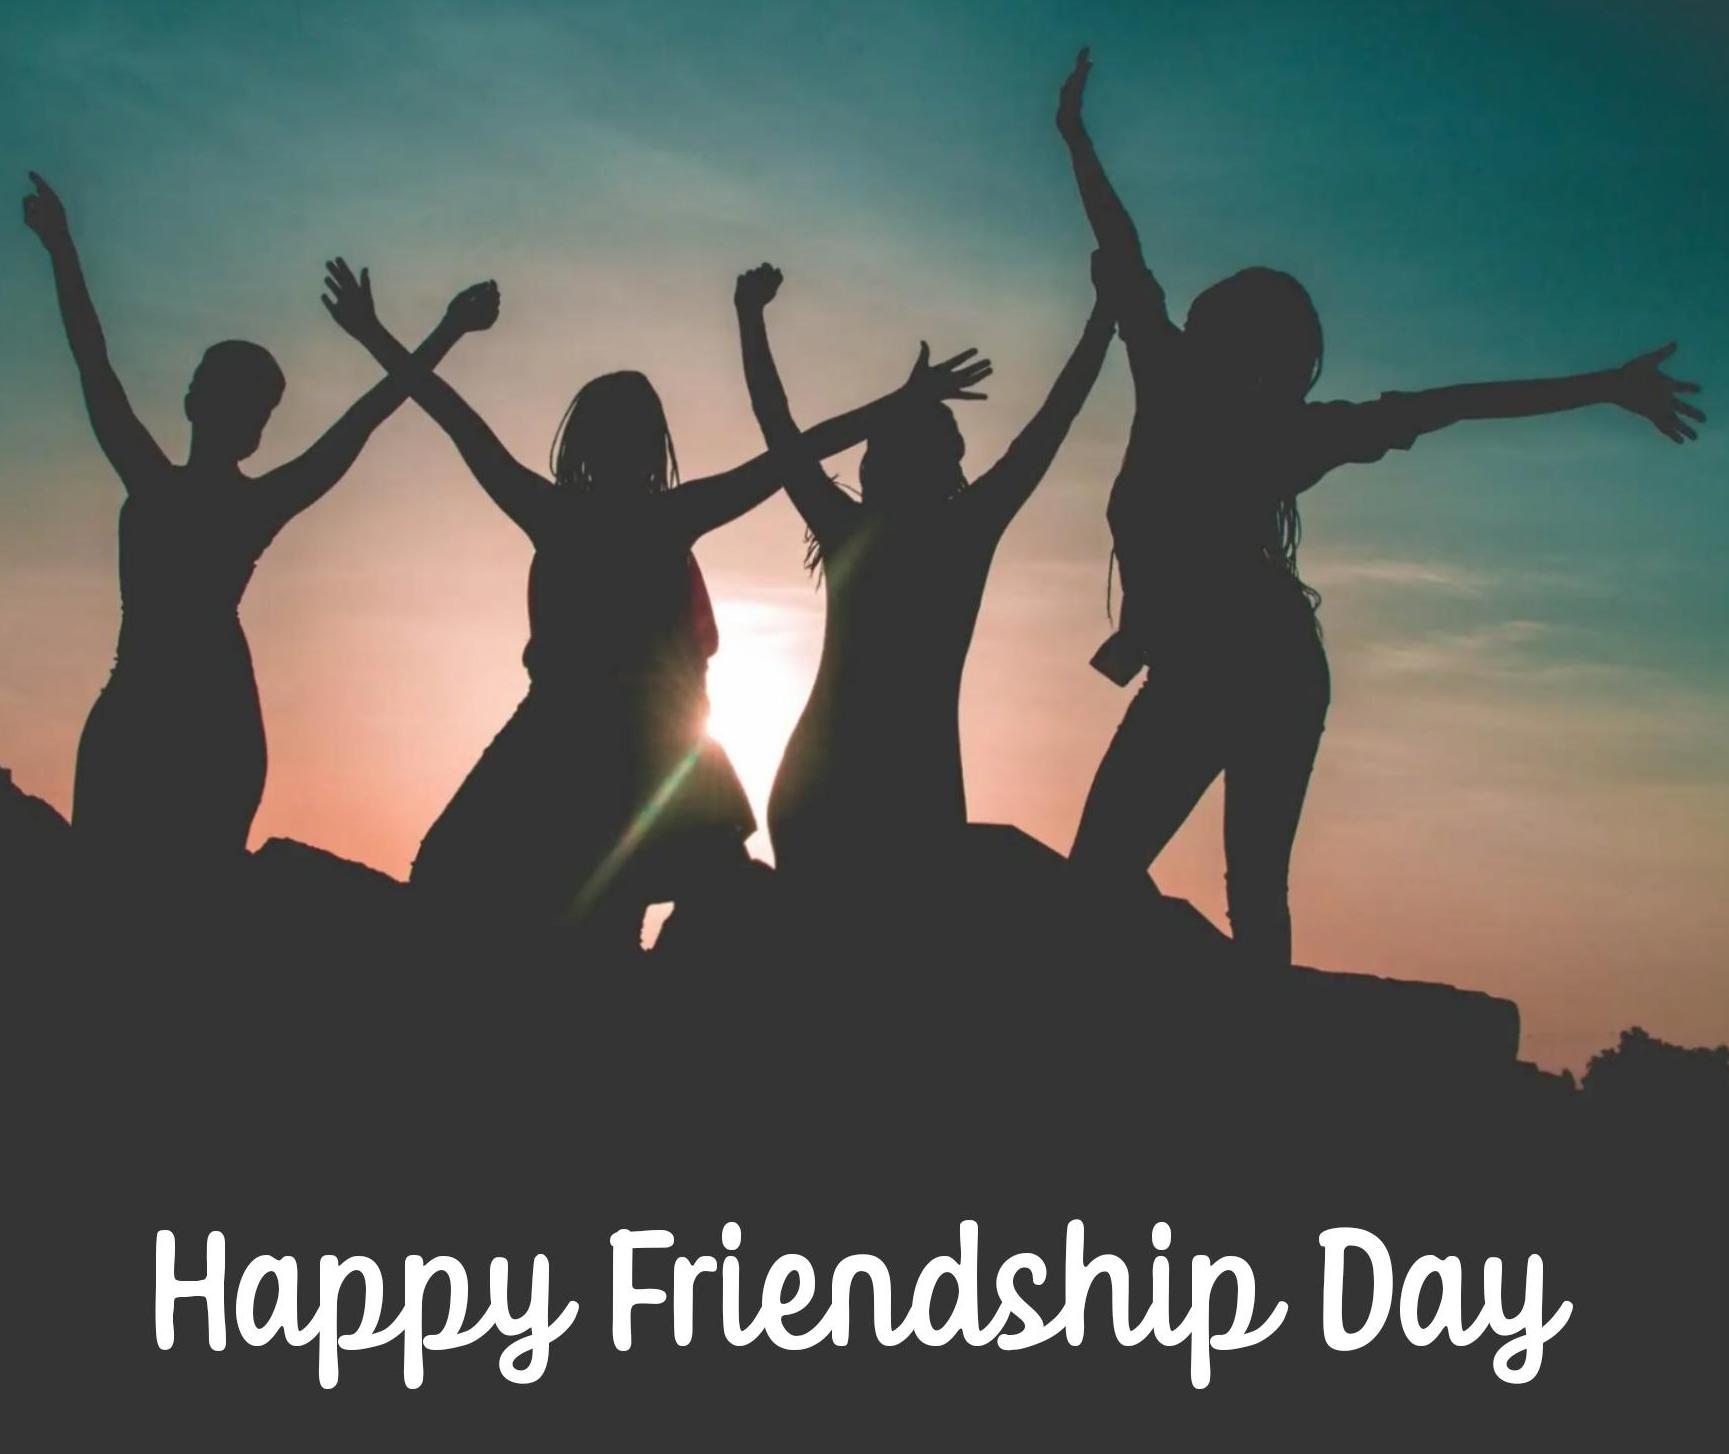 Happy Friendship Day 2022 Wishes & Images फ्रेंडशिप डे Quotes in Hindi